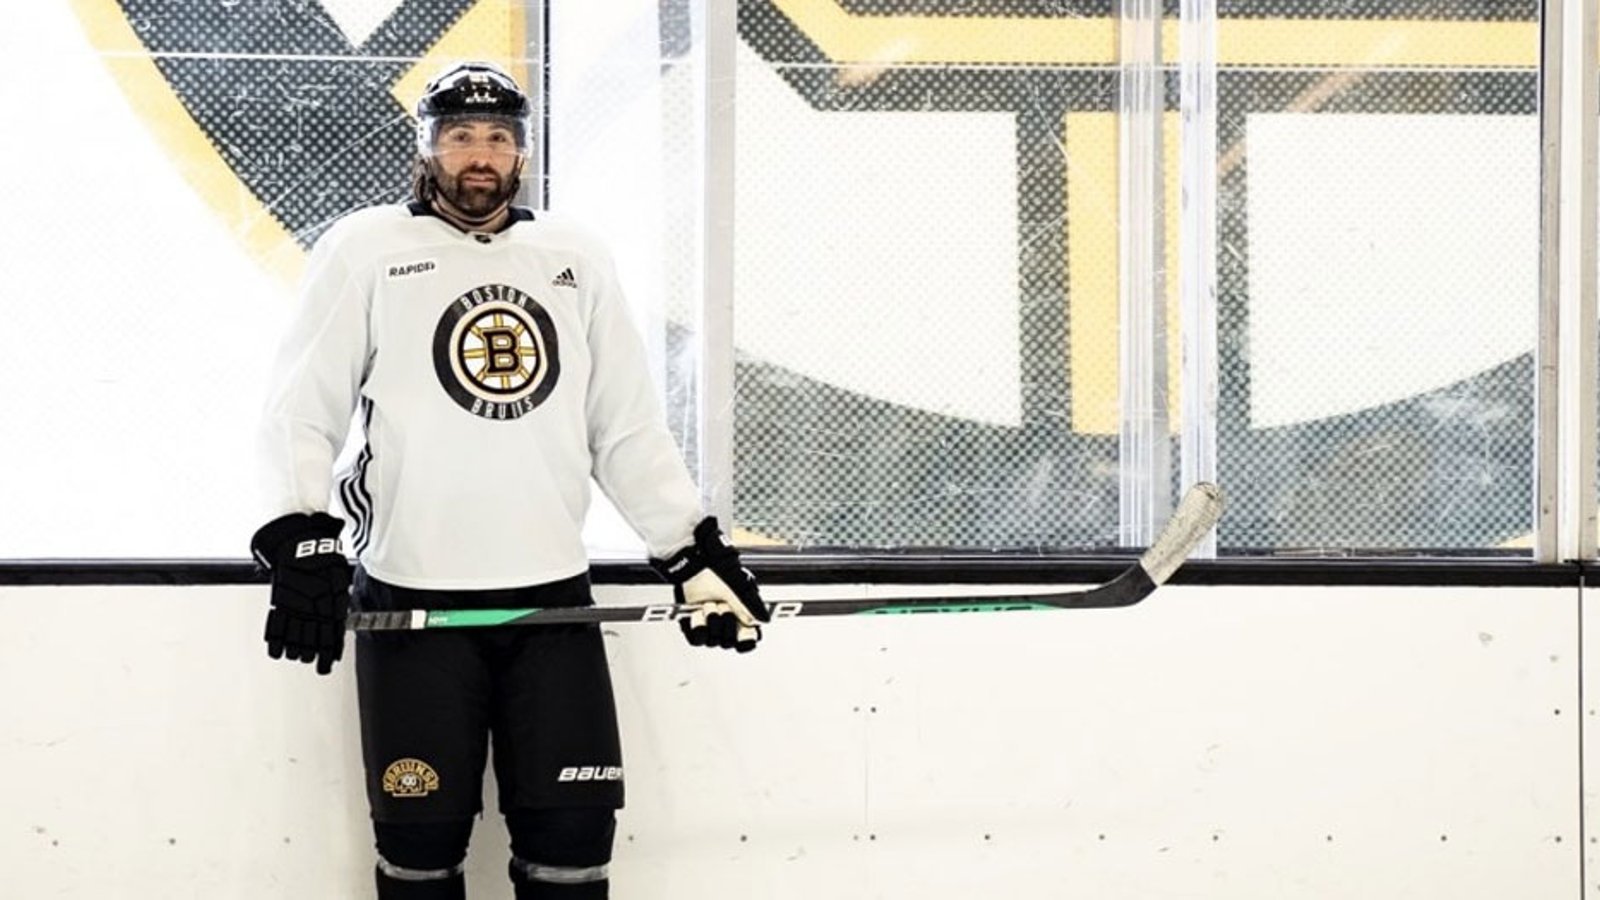 Major update on Pat Maroon from the Bruins today